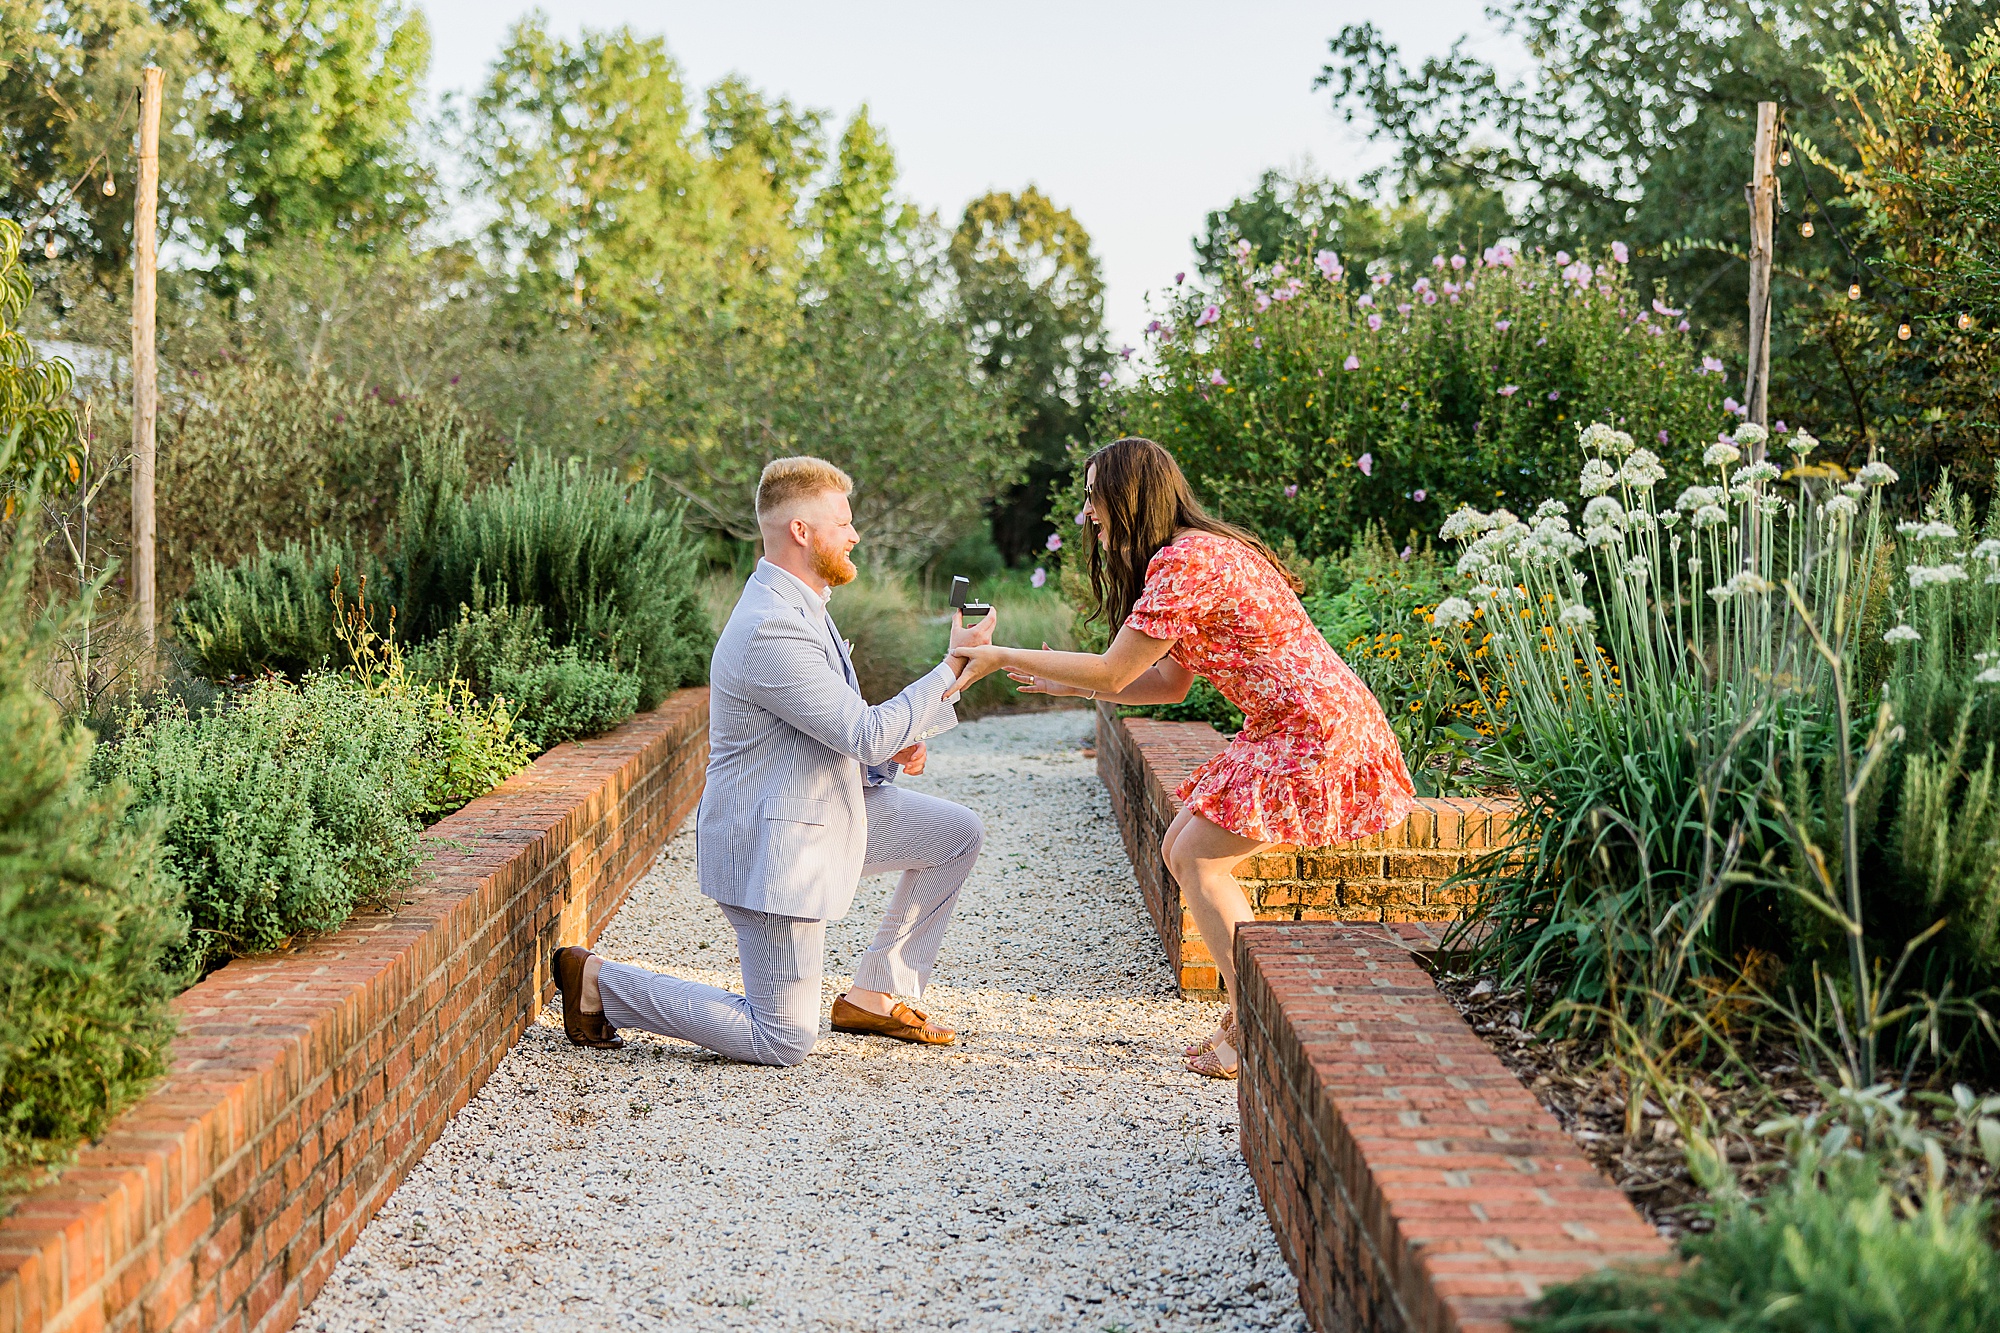 man gets down on one knee in garden to propose